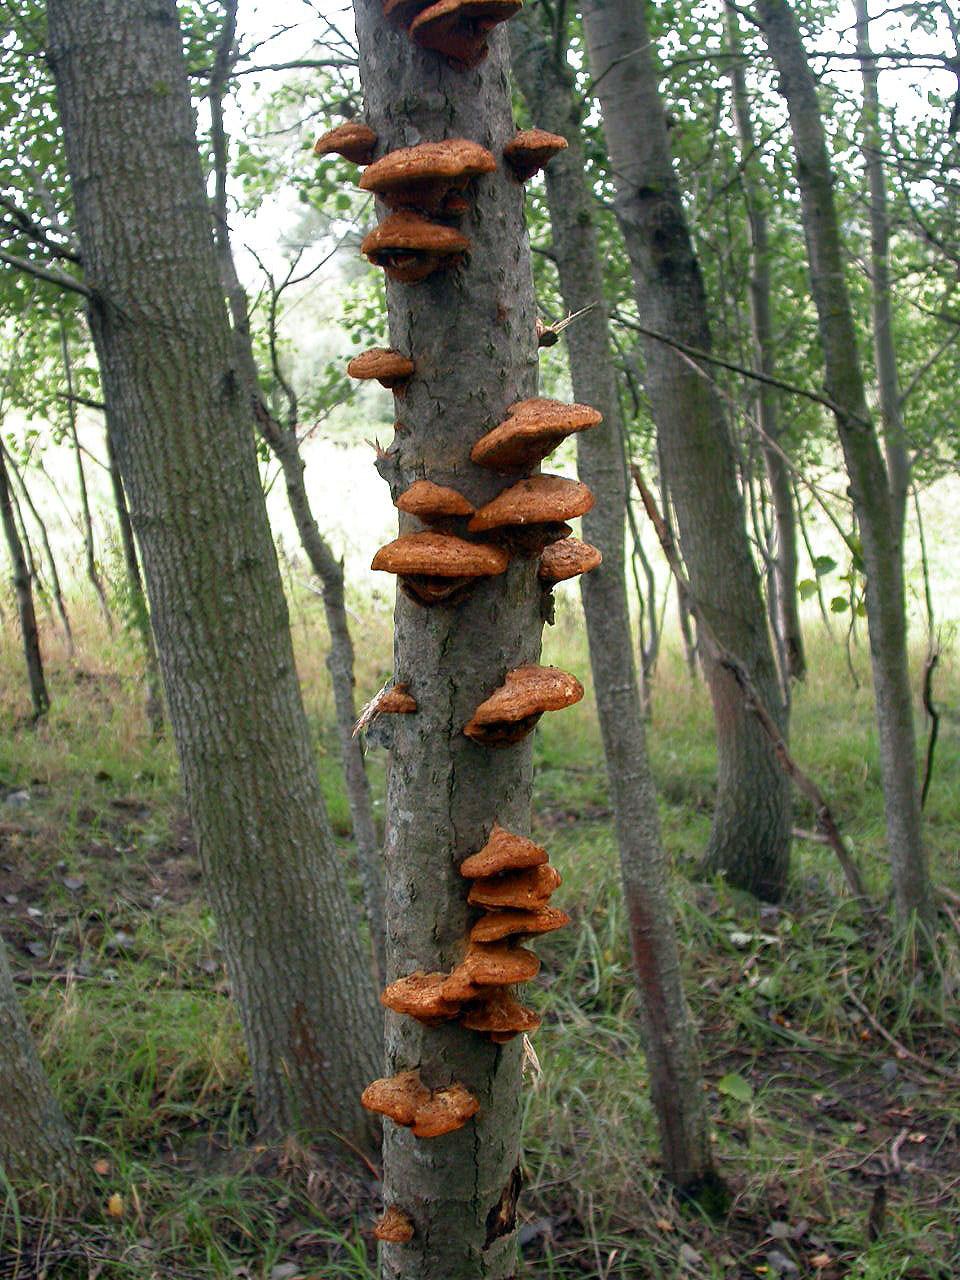 Grove with Populus and Betula, on Populus, 2006. Ryc. 17. Pycnoporellus fulgens (Fr.